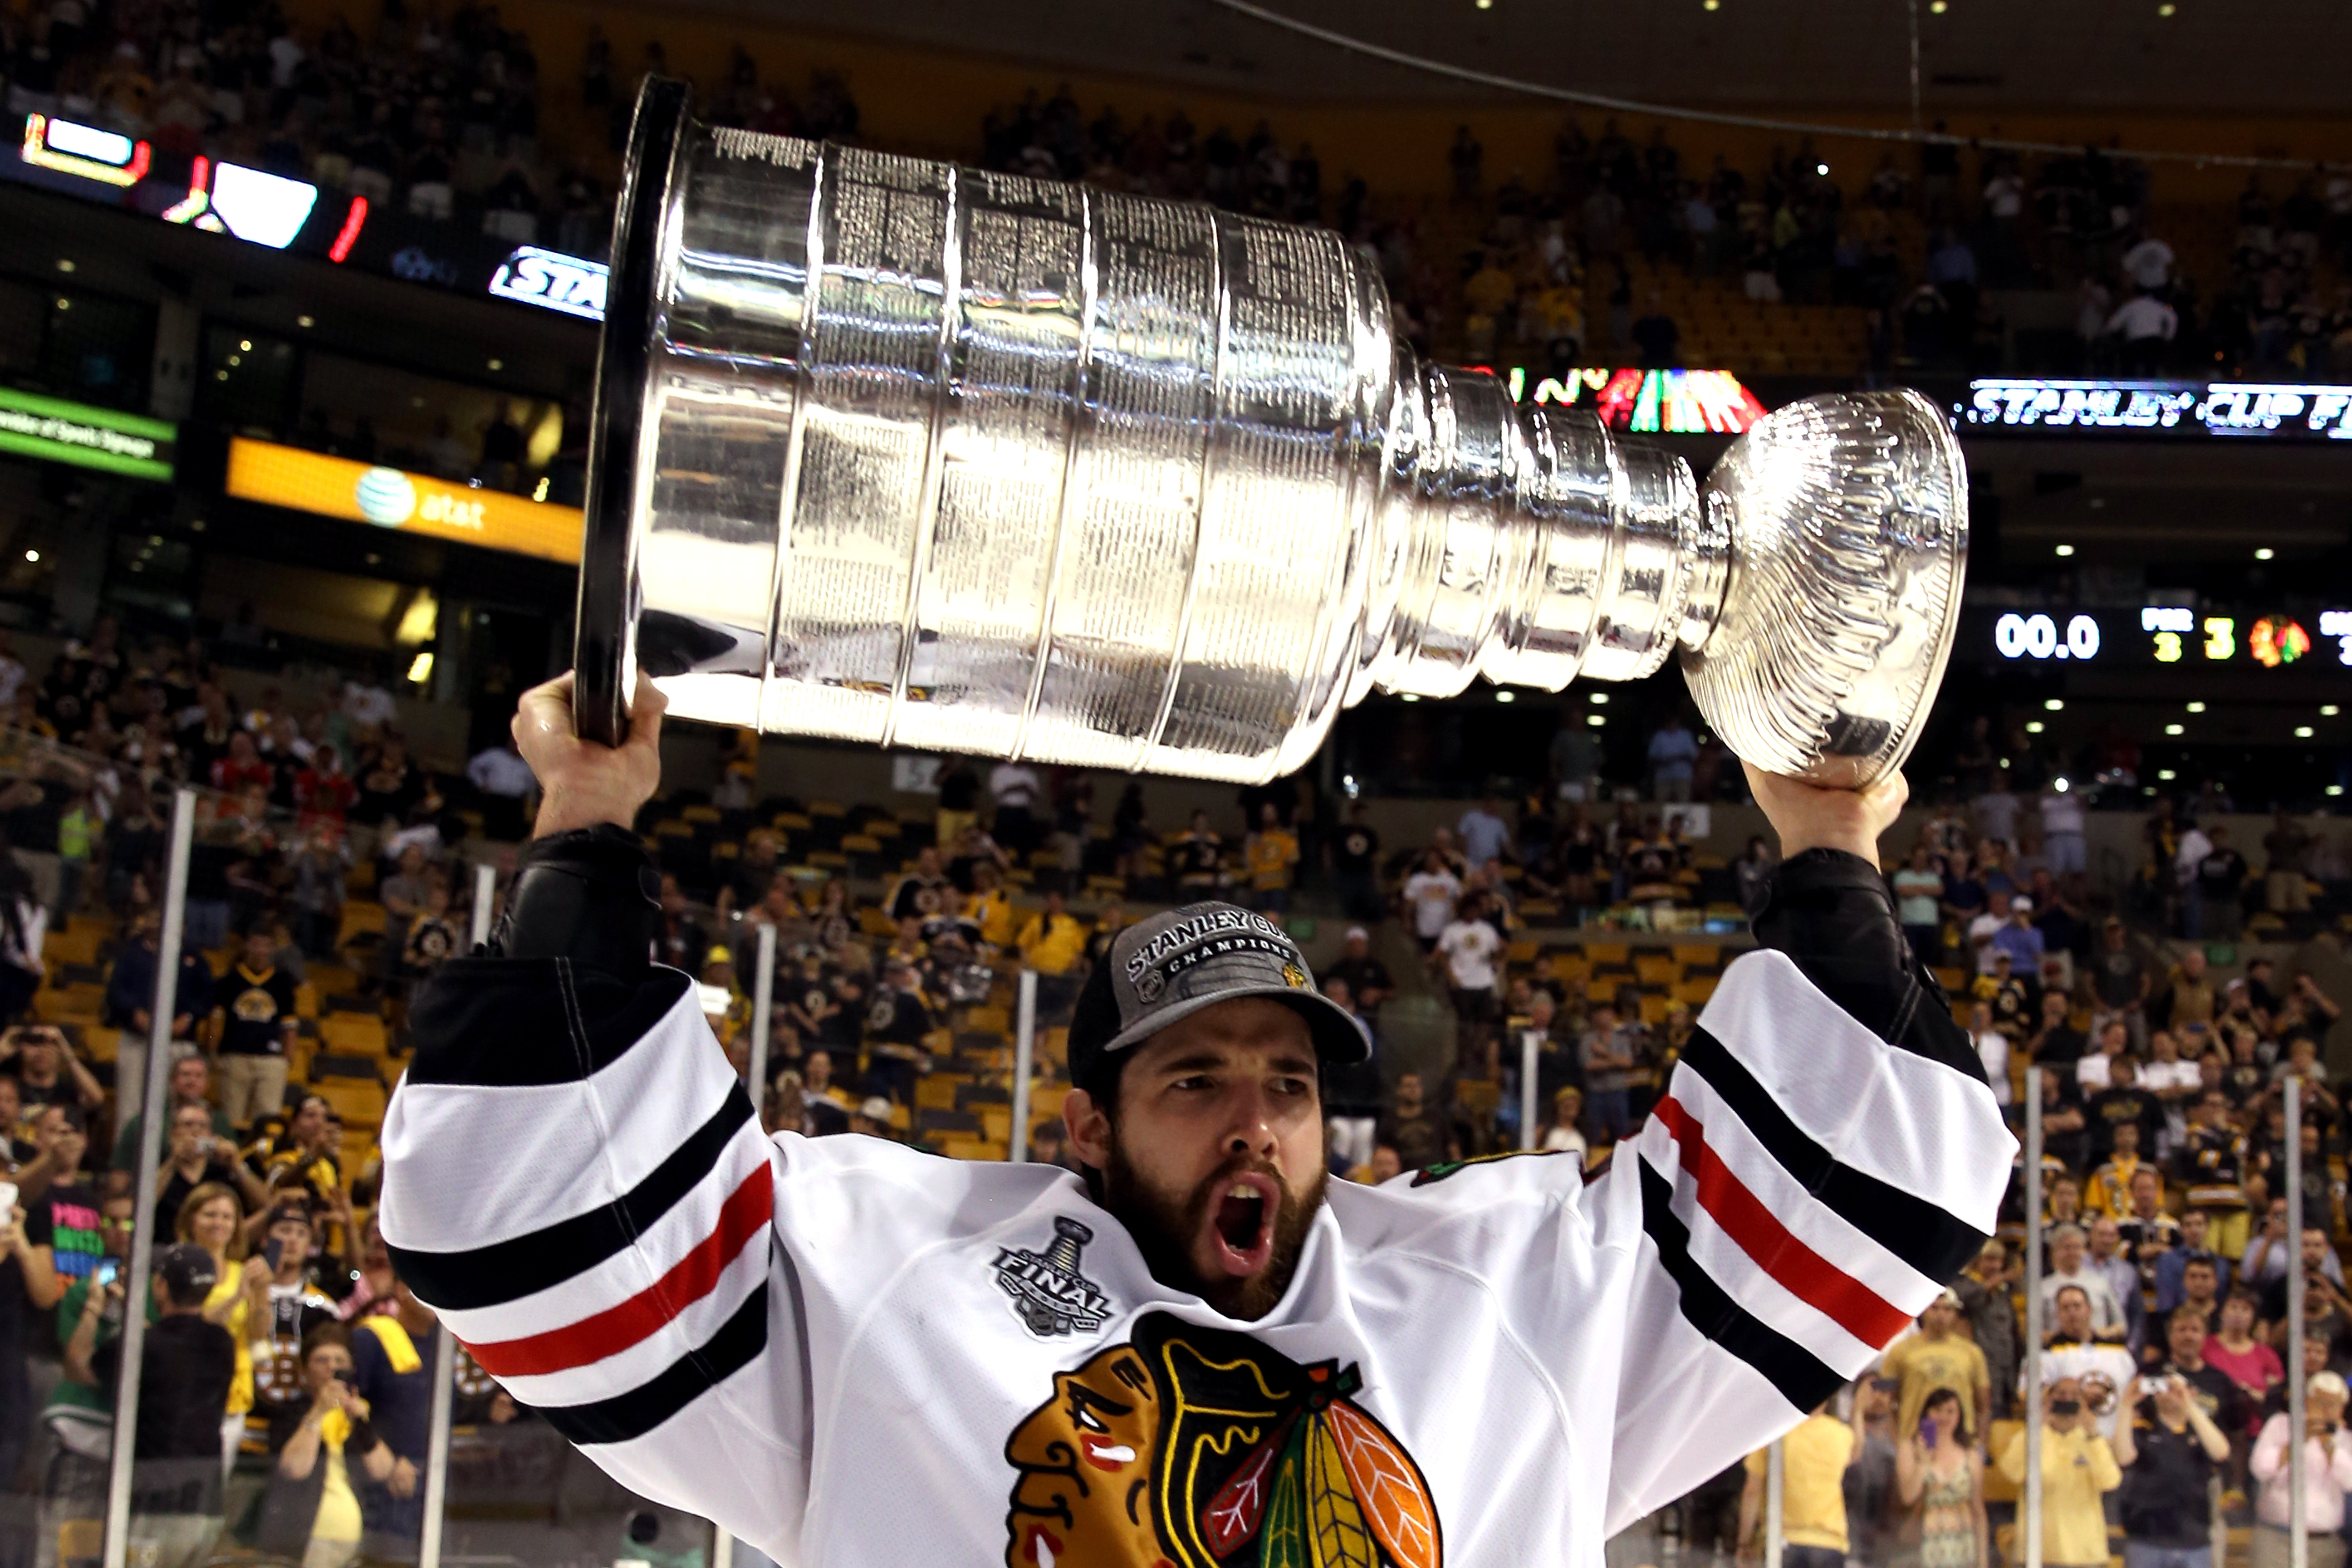 Corey Crawford hoisted the Stanley Cup on the TD Garden Ice, outplaying Tuukka Rask at a fraction of the cost. (Photo by Bruce Bennett/Getty Images)